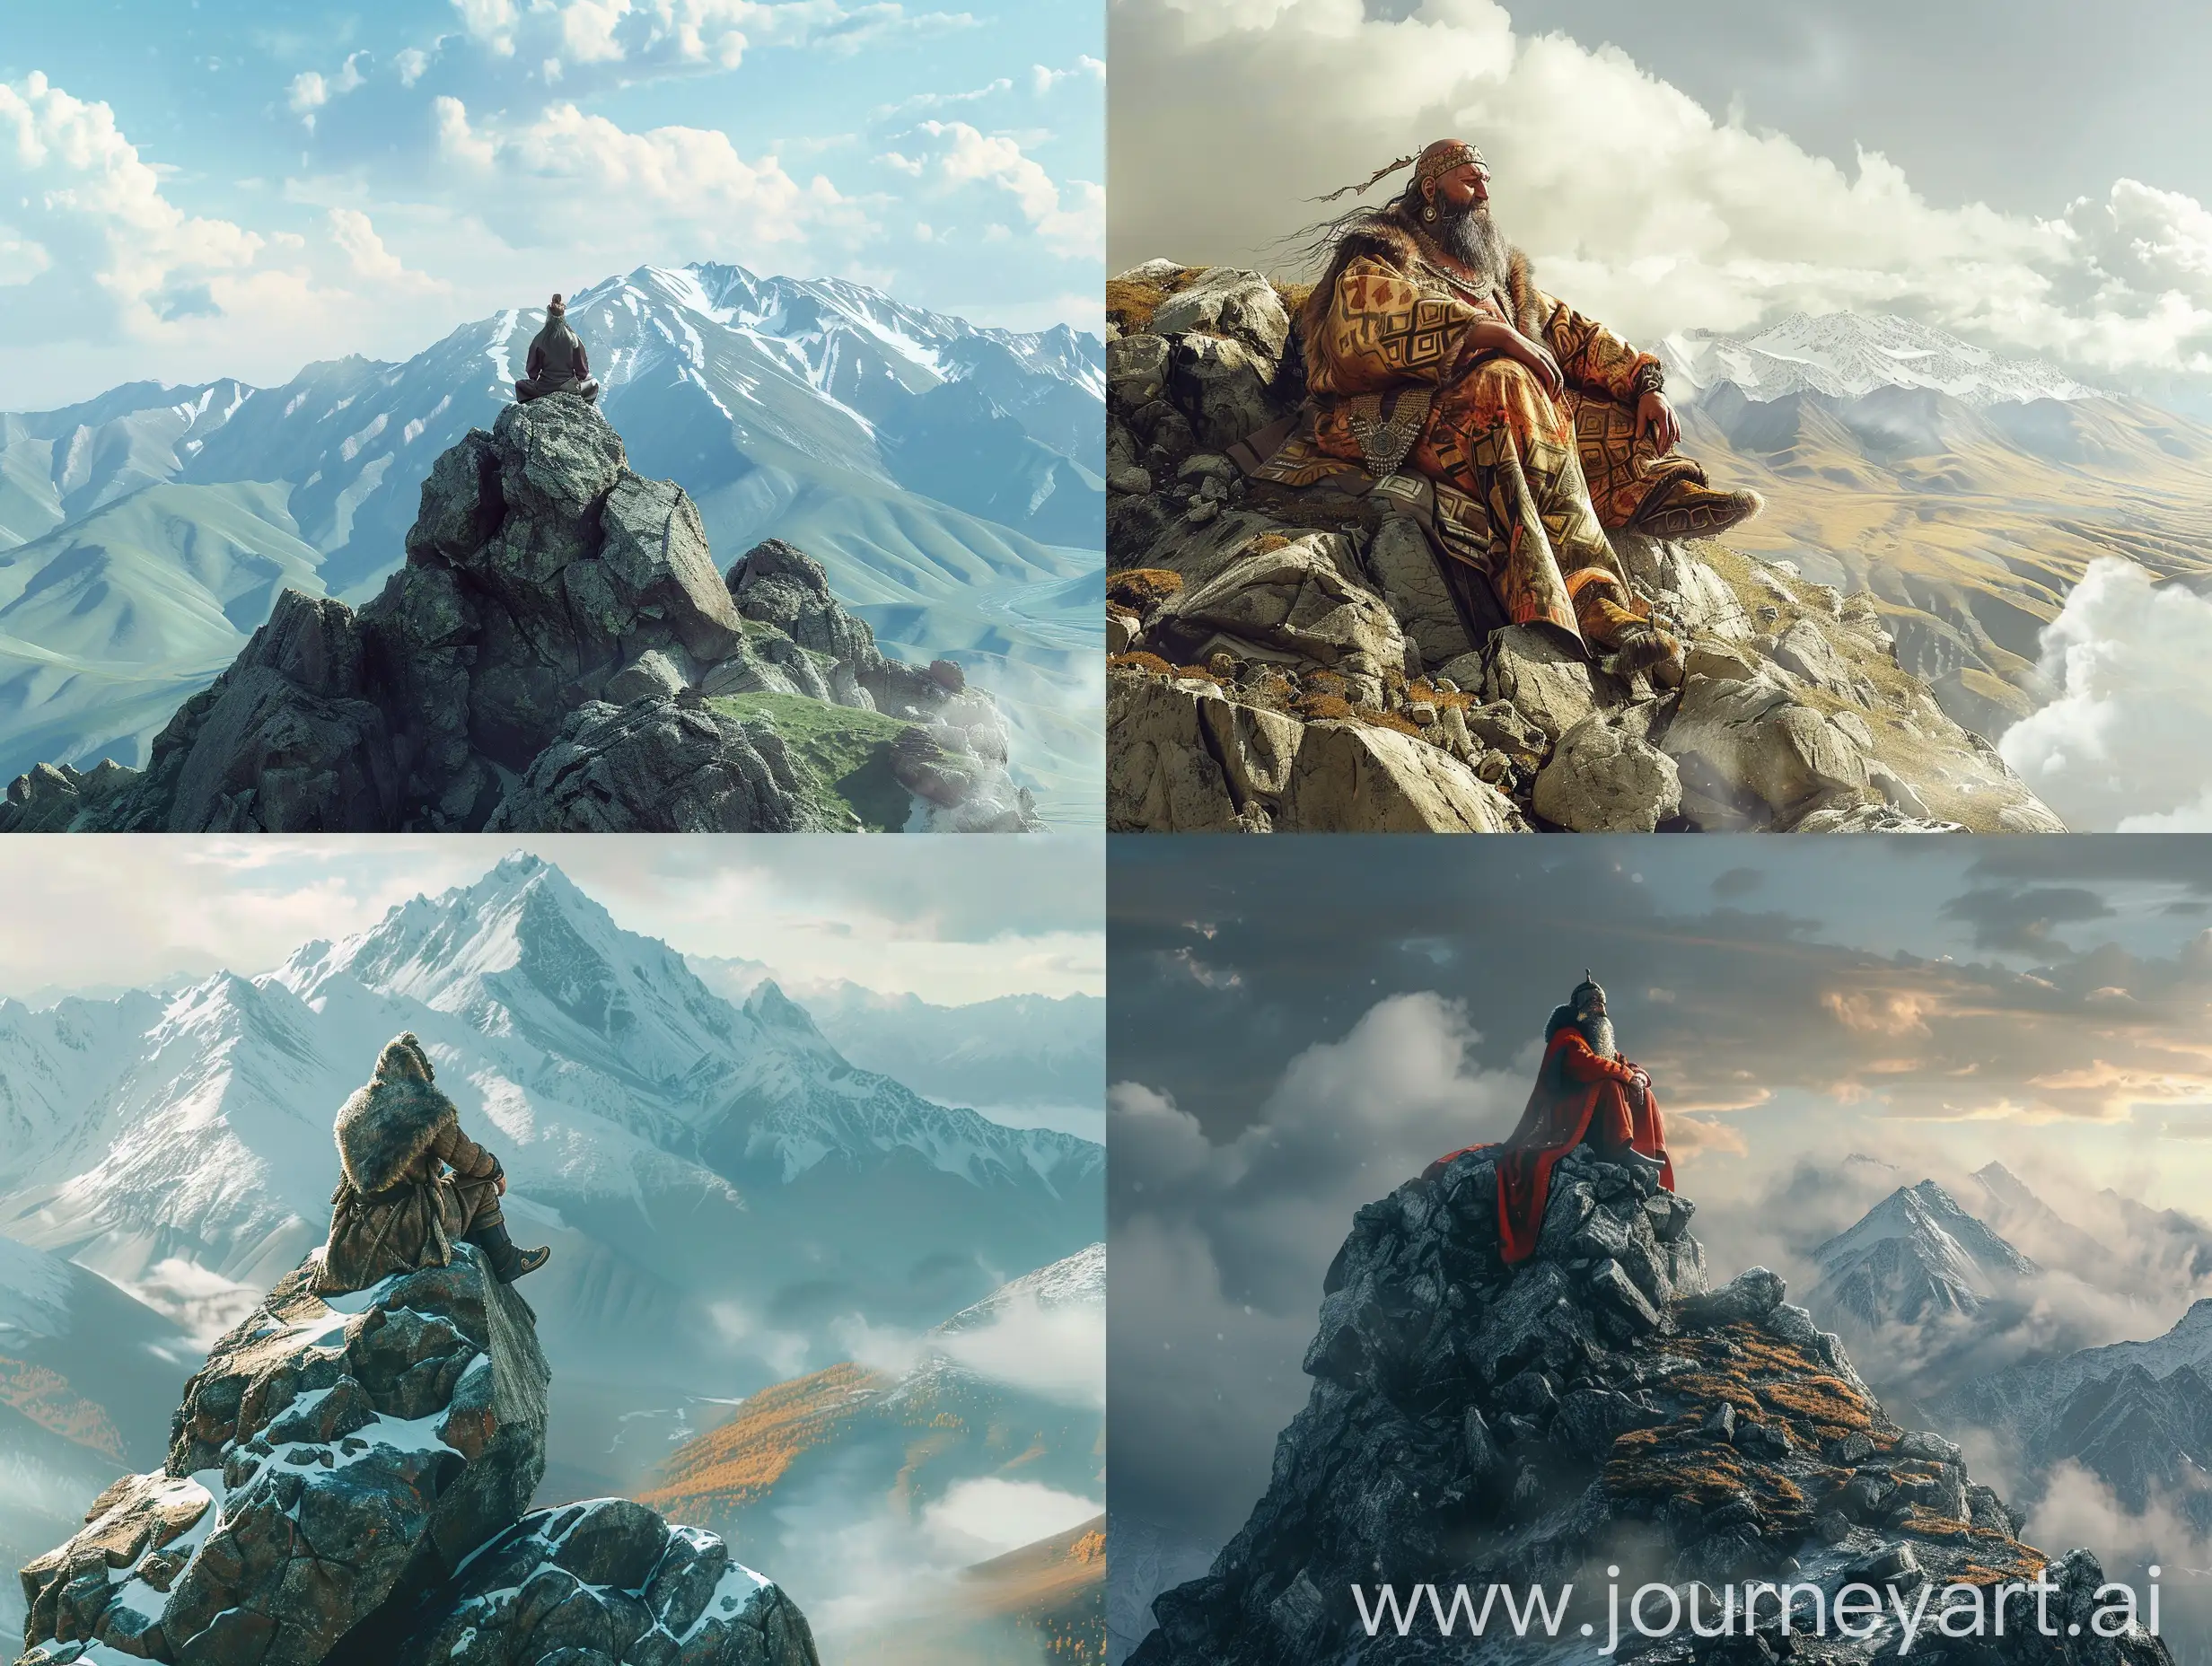 AdamKhan-the-Mighty-Altai-God-Overseeing-His-World-from-Atop-a-Mountain